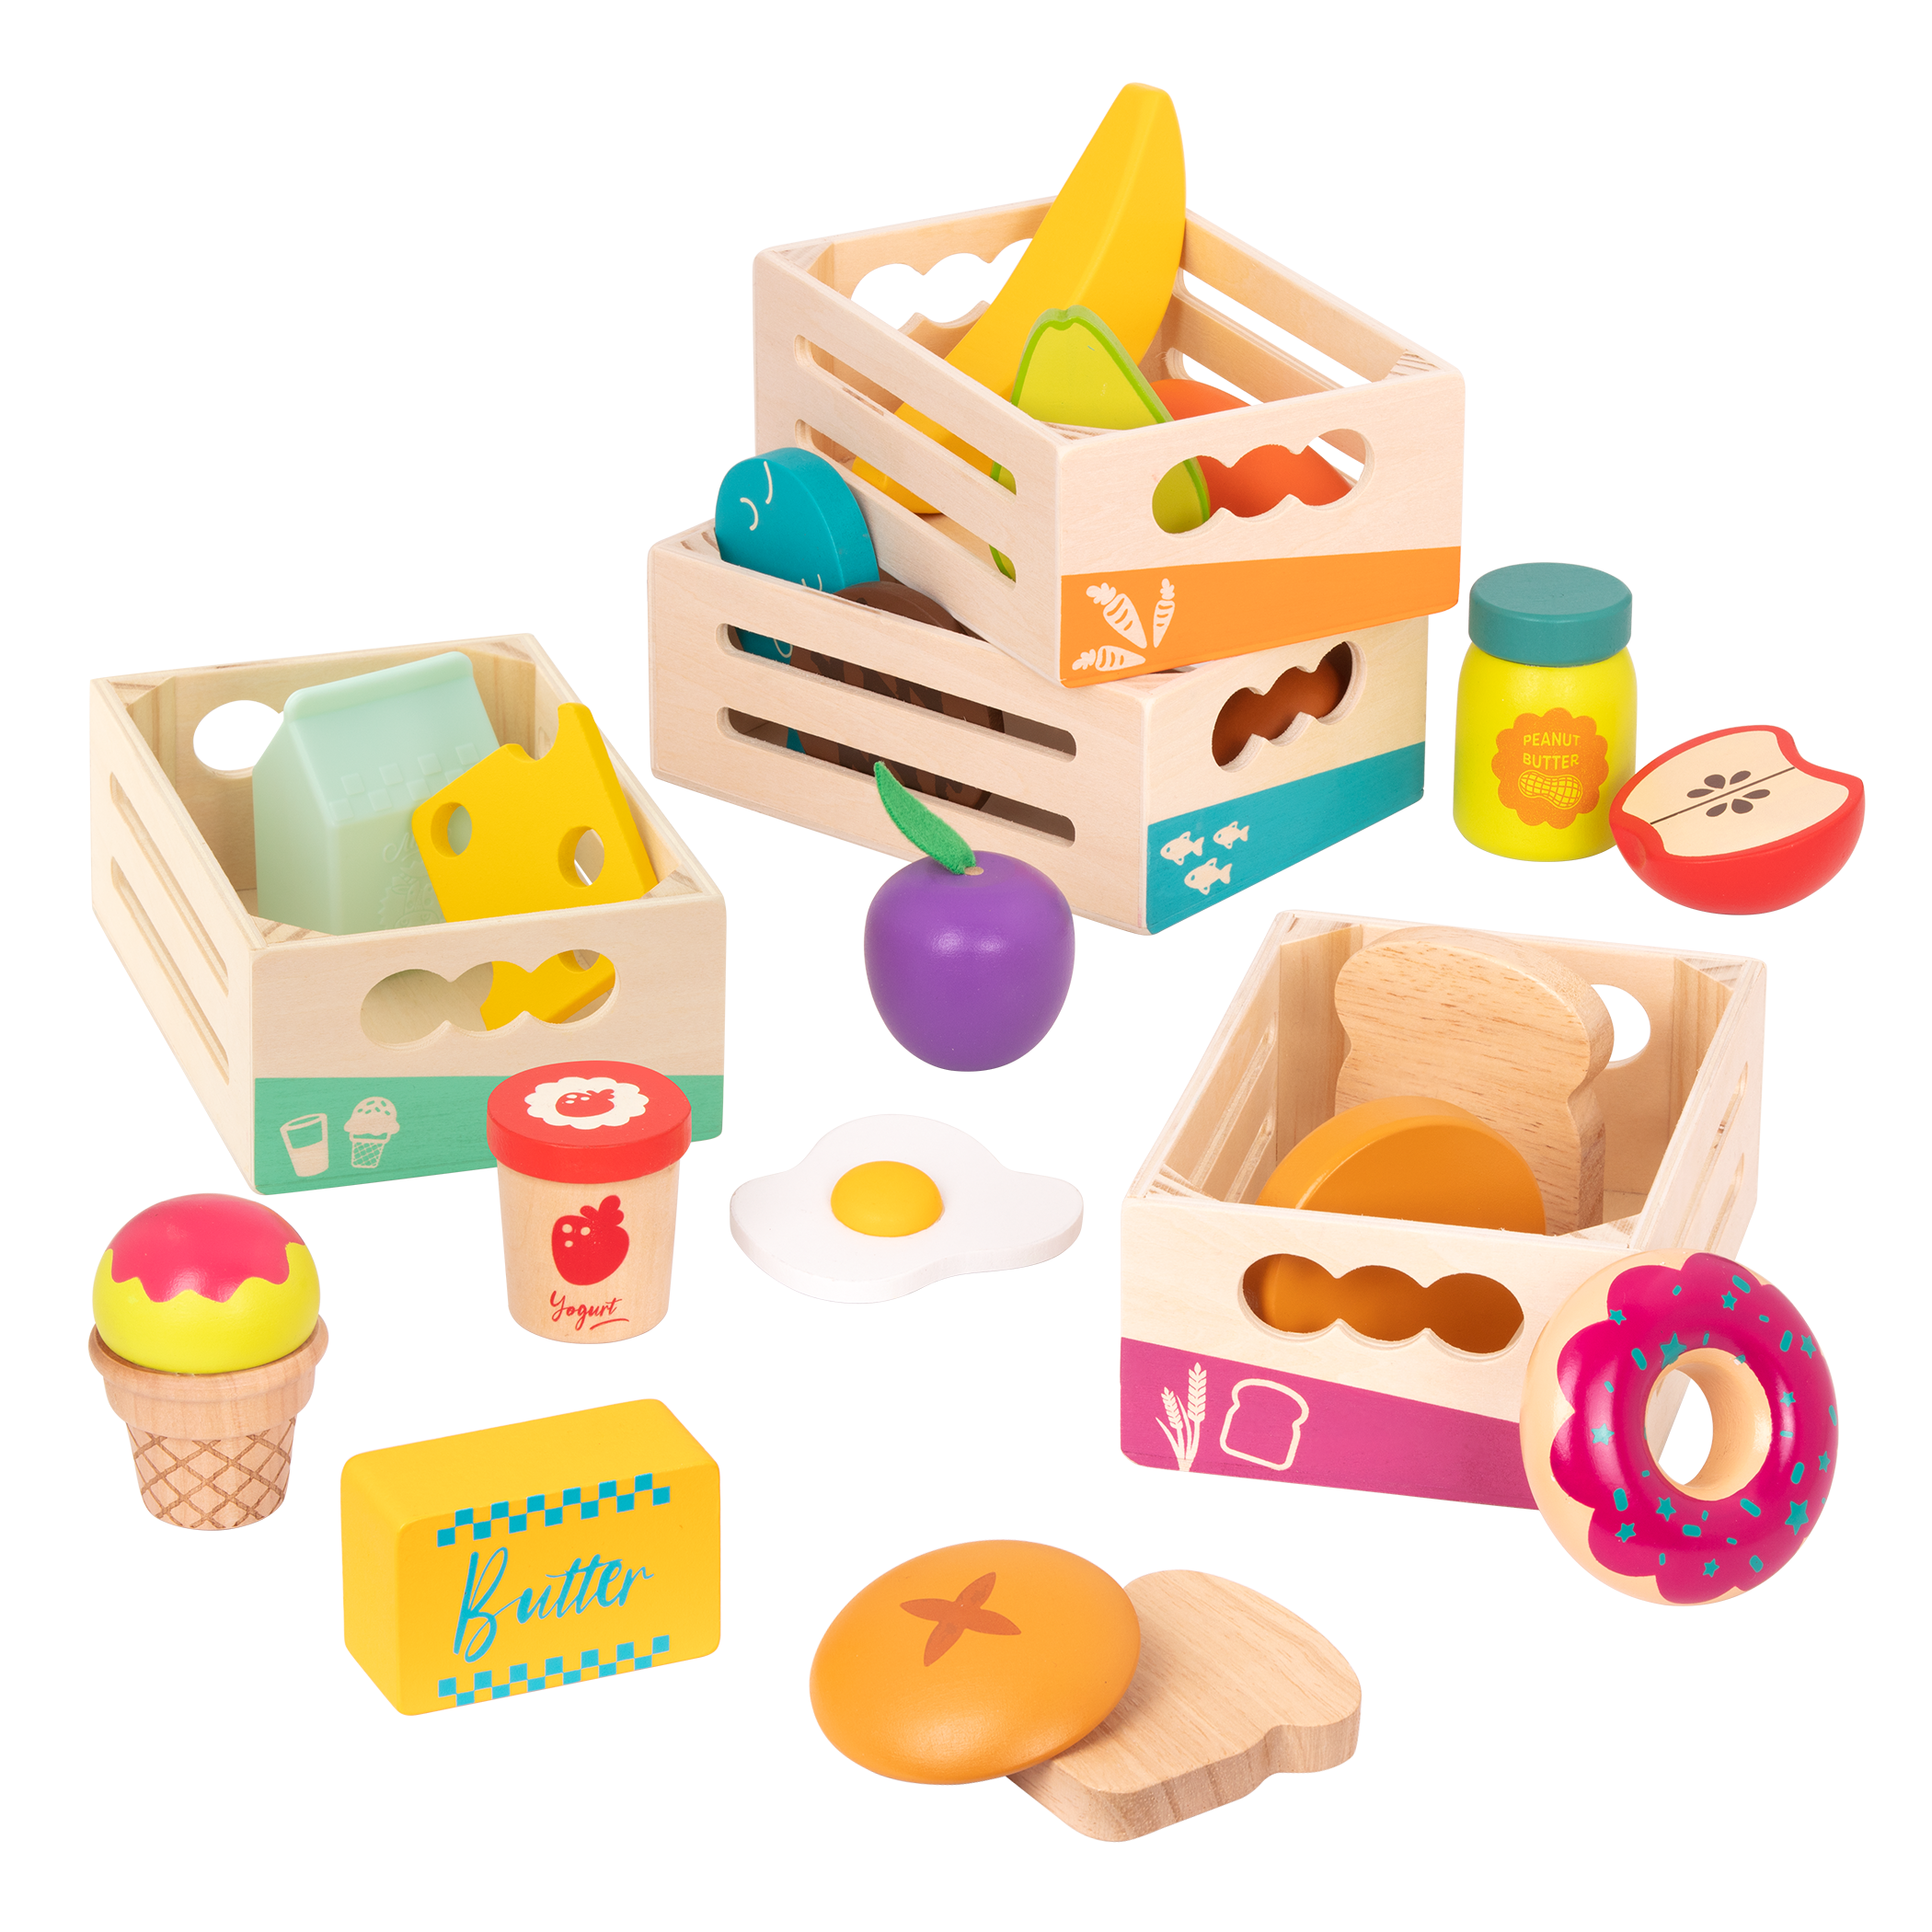 Wooden play food in crates.